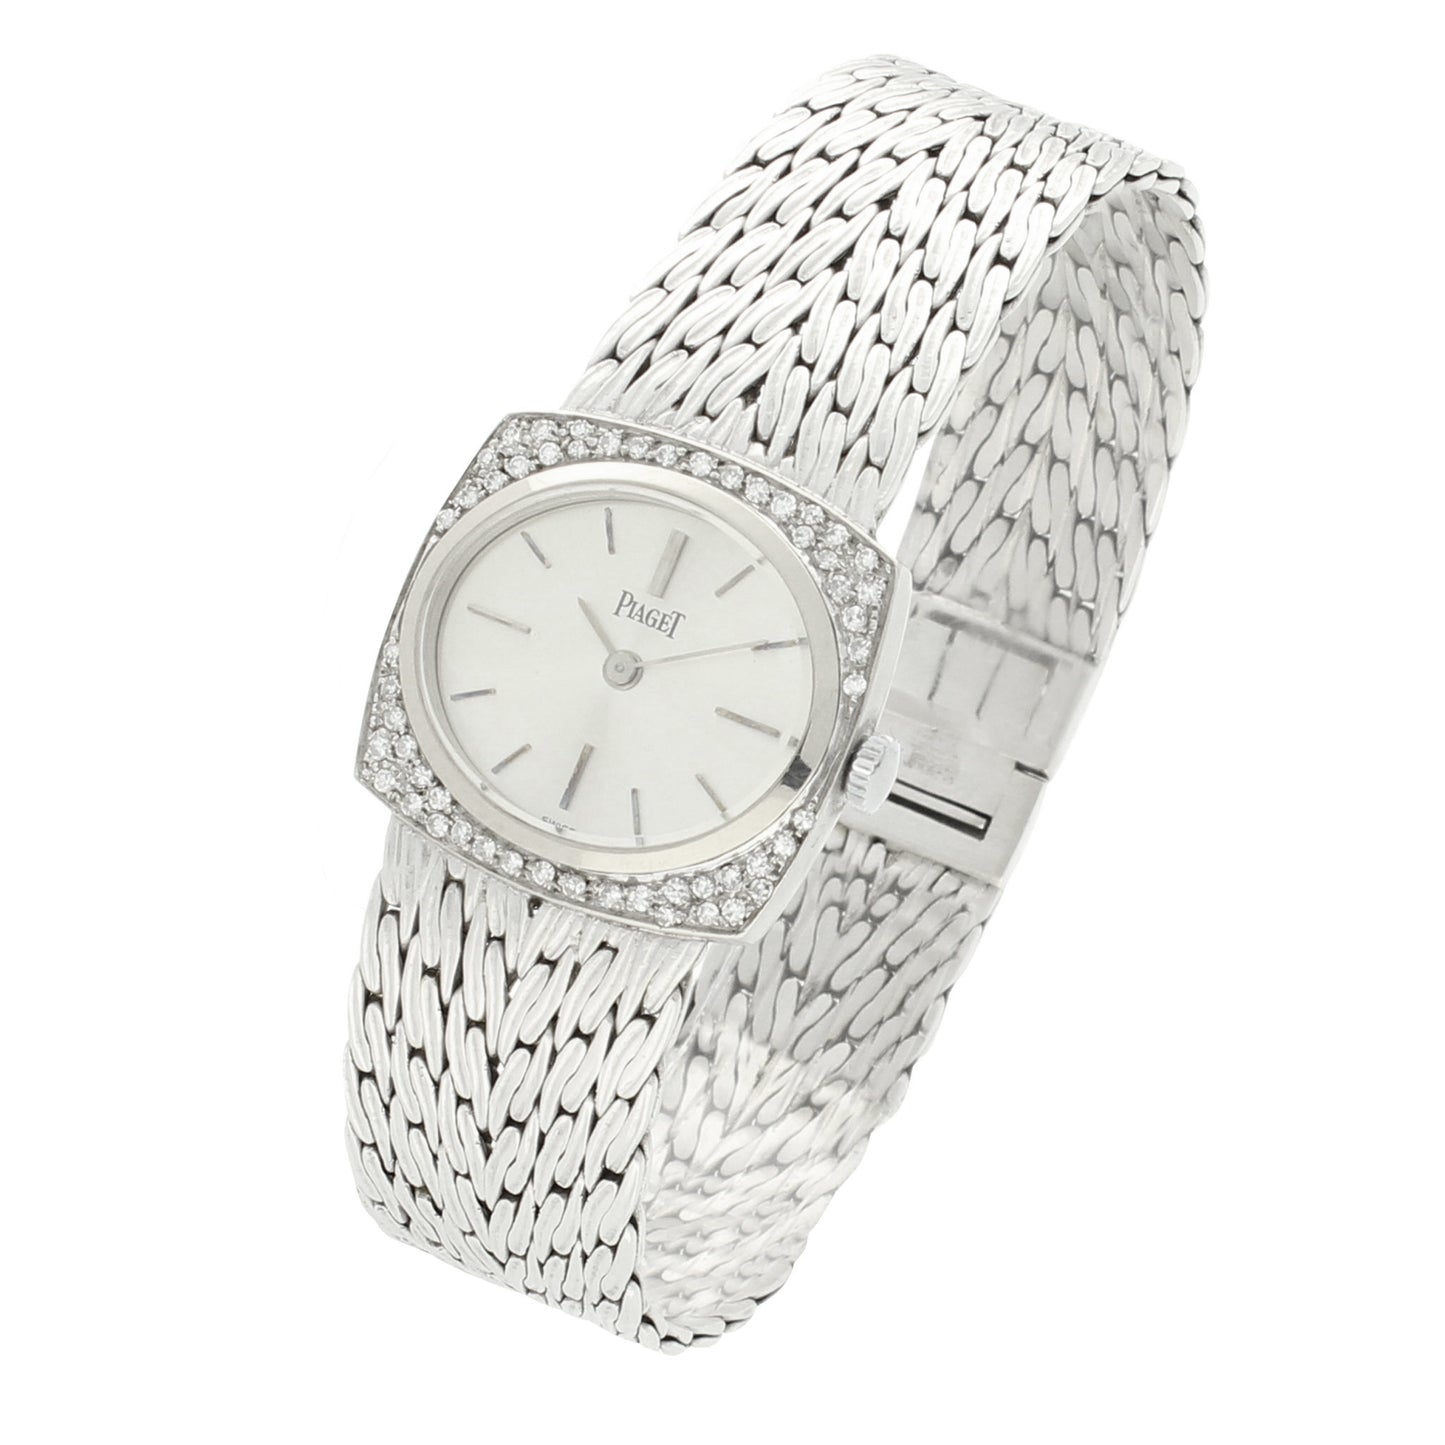 18ct white gold and diamond set, reference 9545 'cushion cased' bracelet watch. Made 1970s